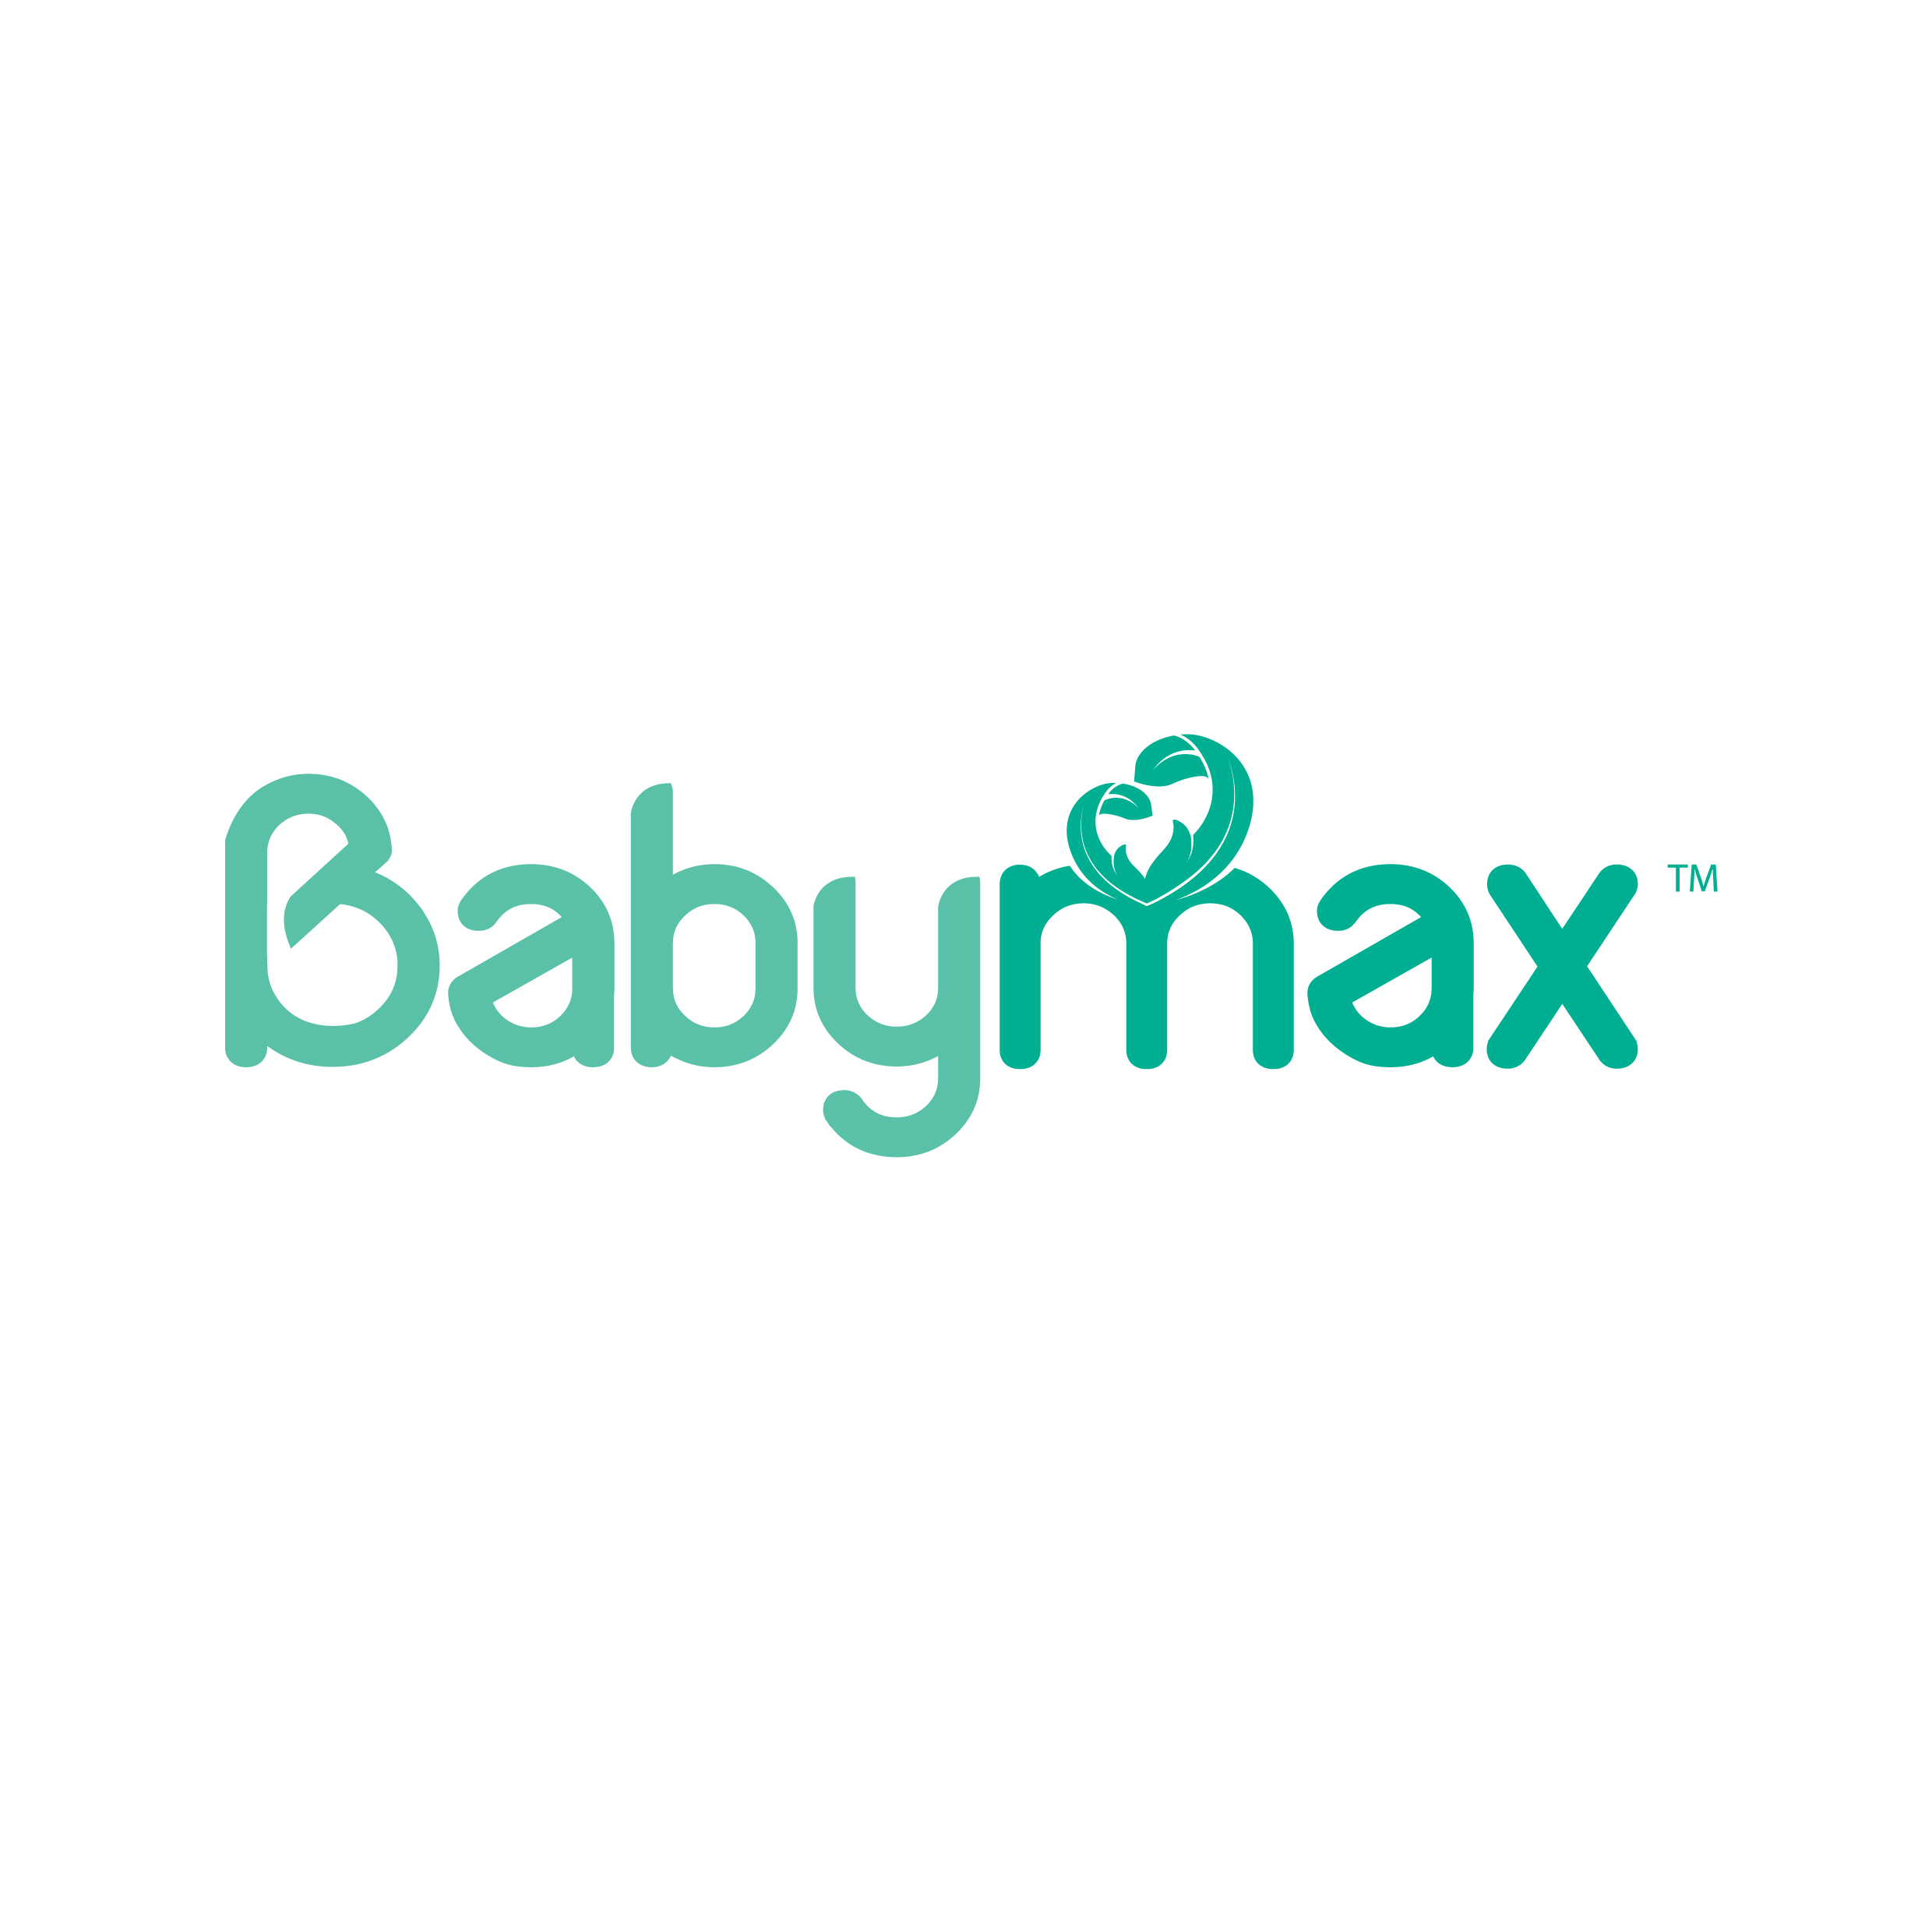 Babymax Official Store